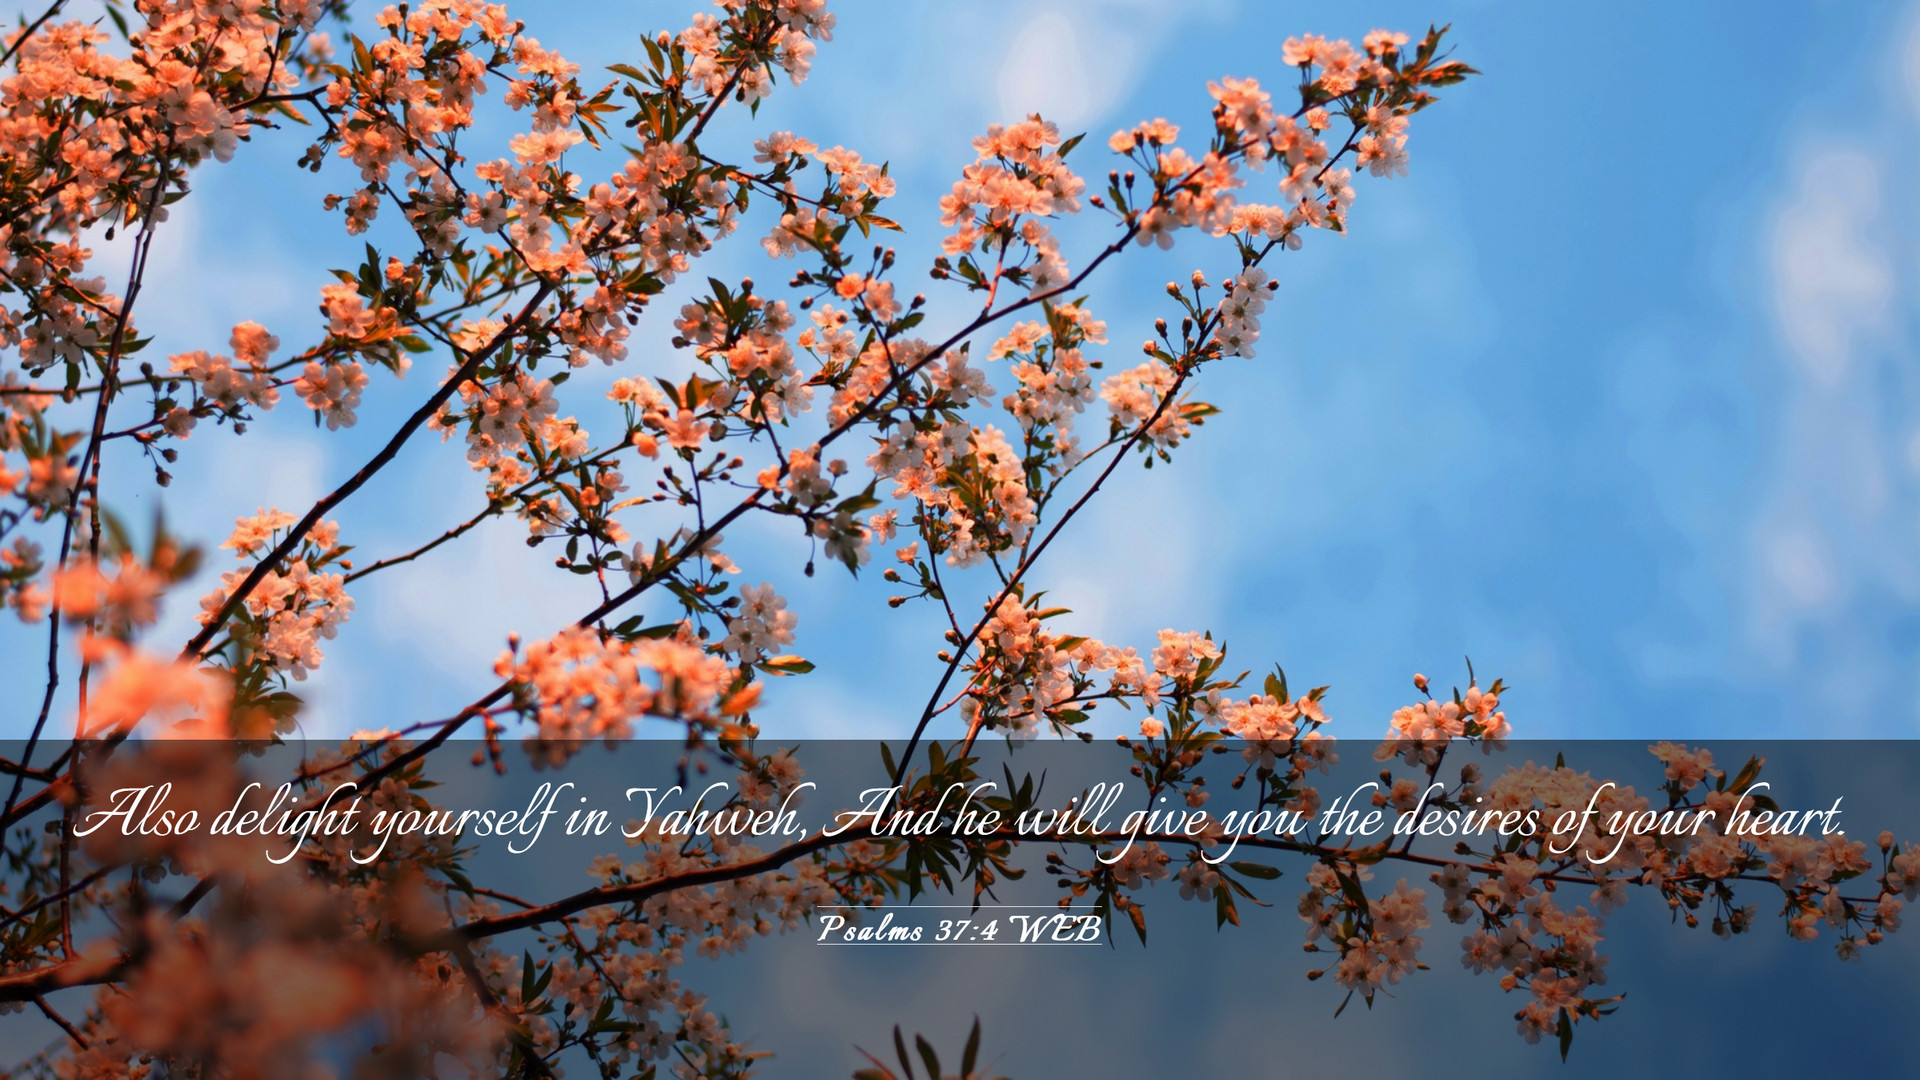 Psalms 37:4 WEB Desktop Wallpaper delight yourself in Yahweh, And he will give